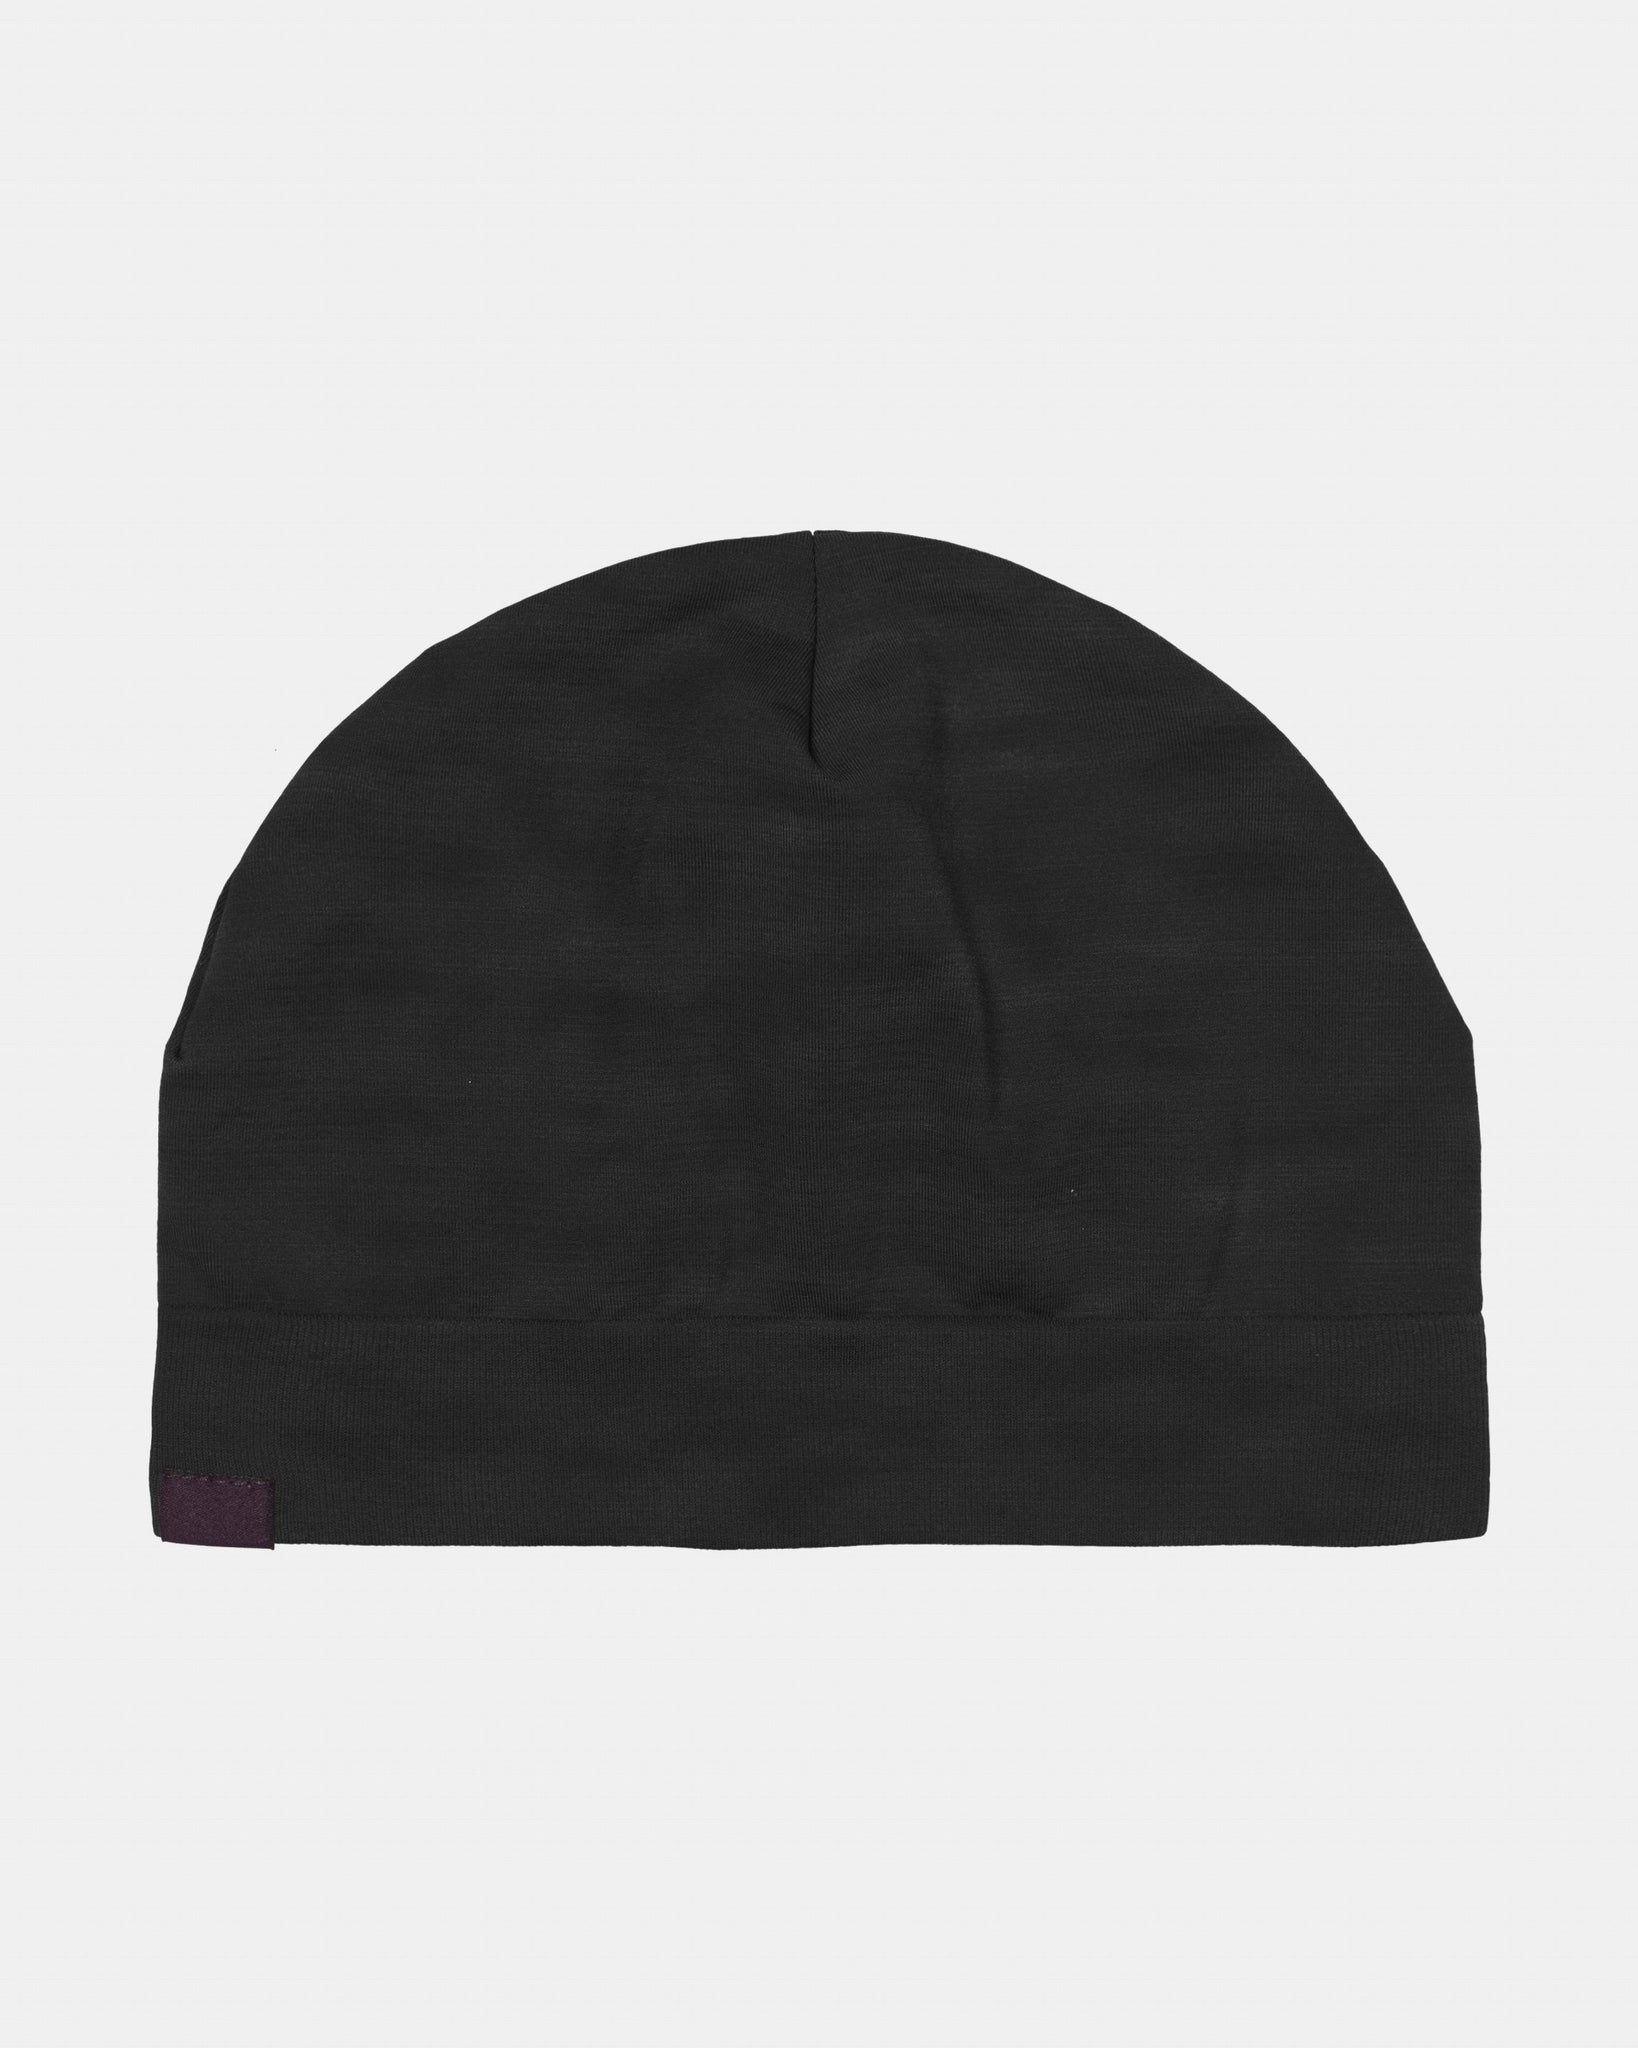 Escapism Knit Cycling Beanie